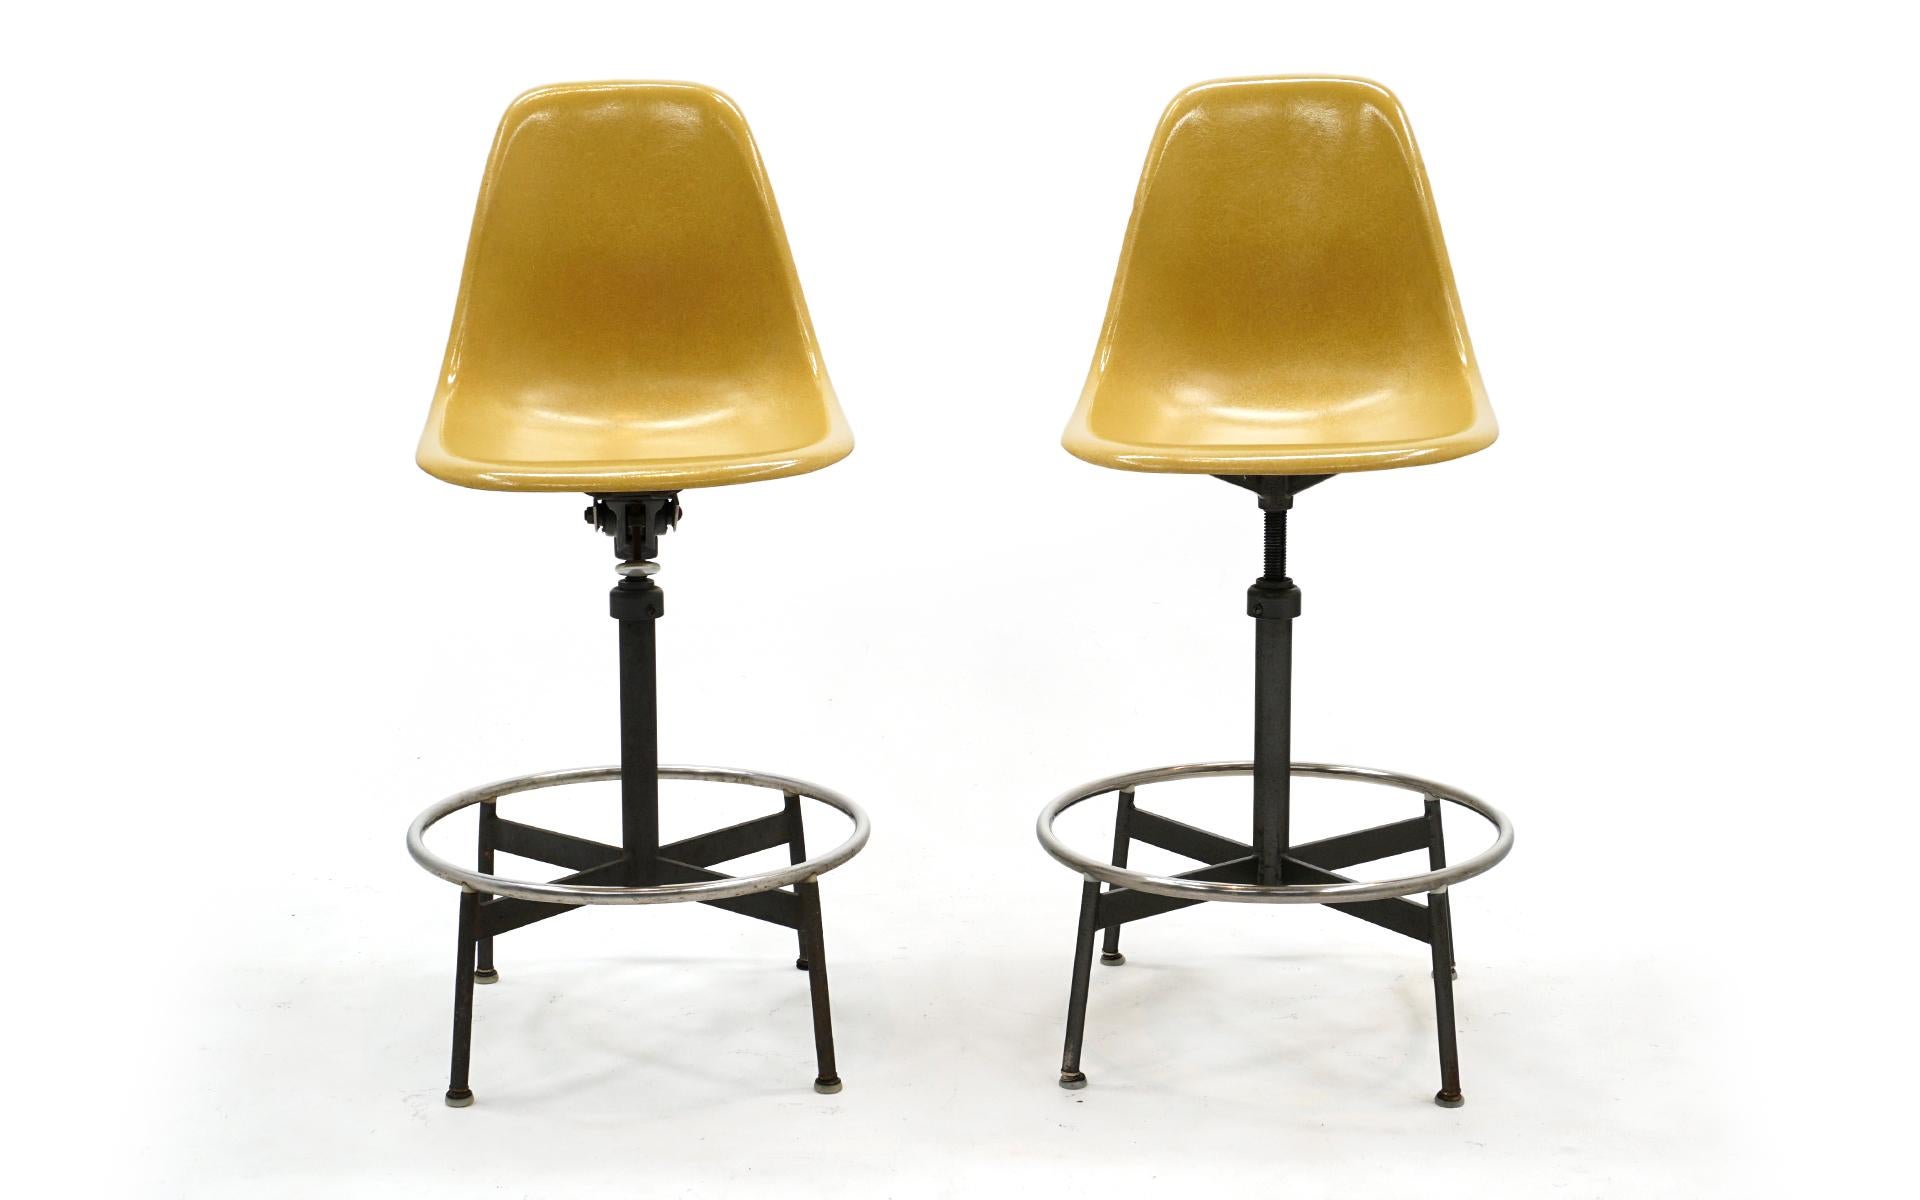 Pair of Yellow, Swivel Barstools / Drafting Stools by Charles and Ray Eames In Good Condition For Sale In Kansas City, MO